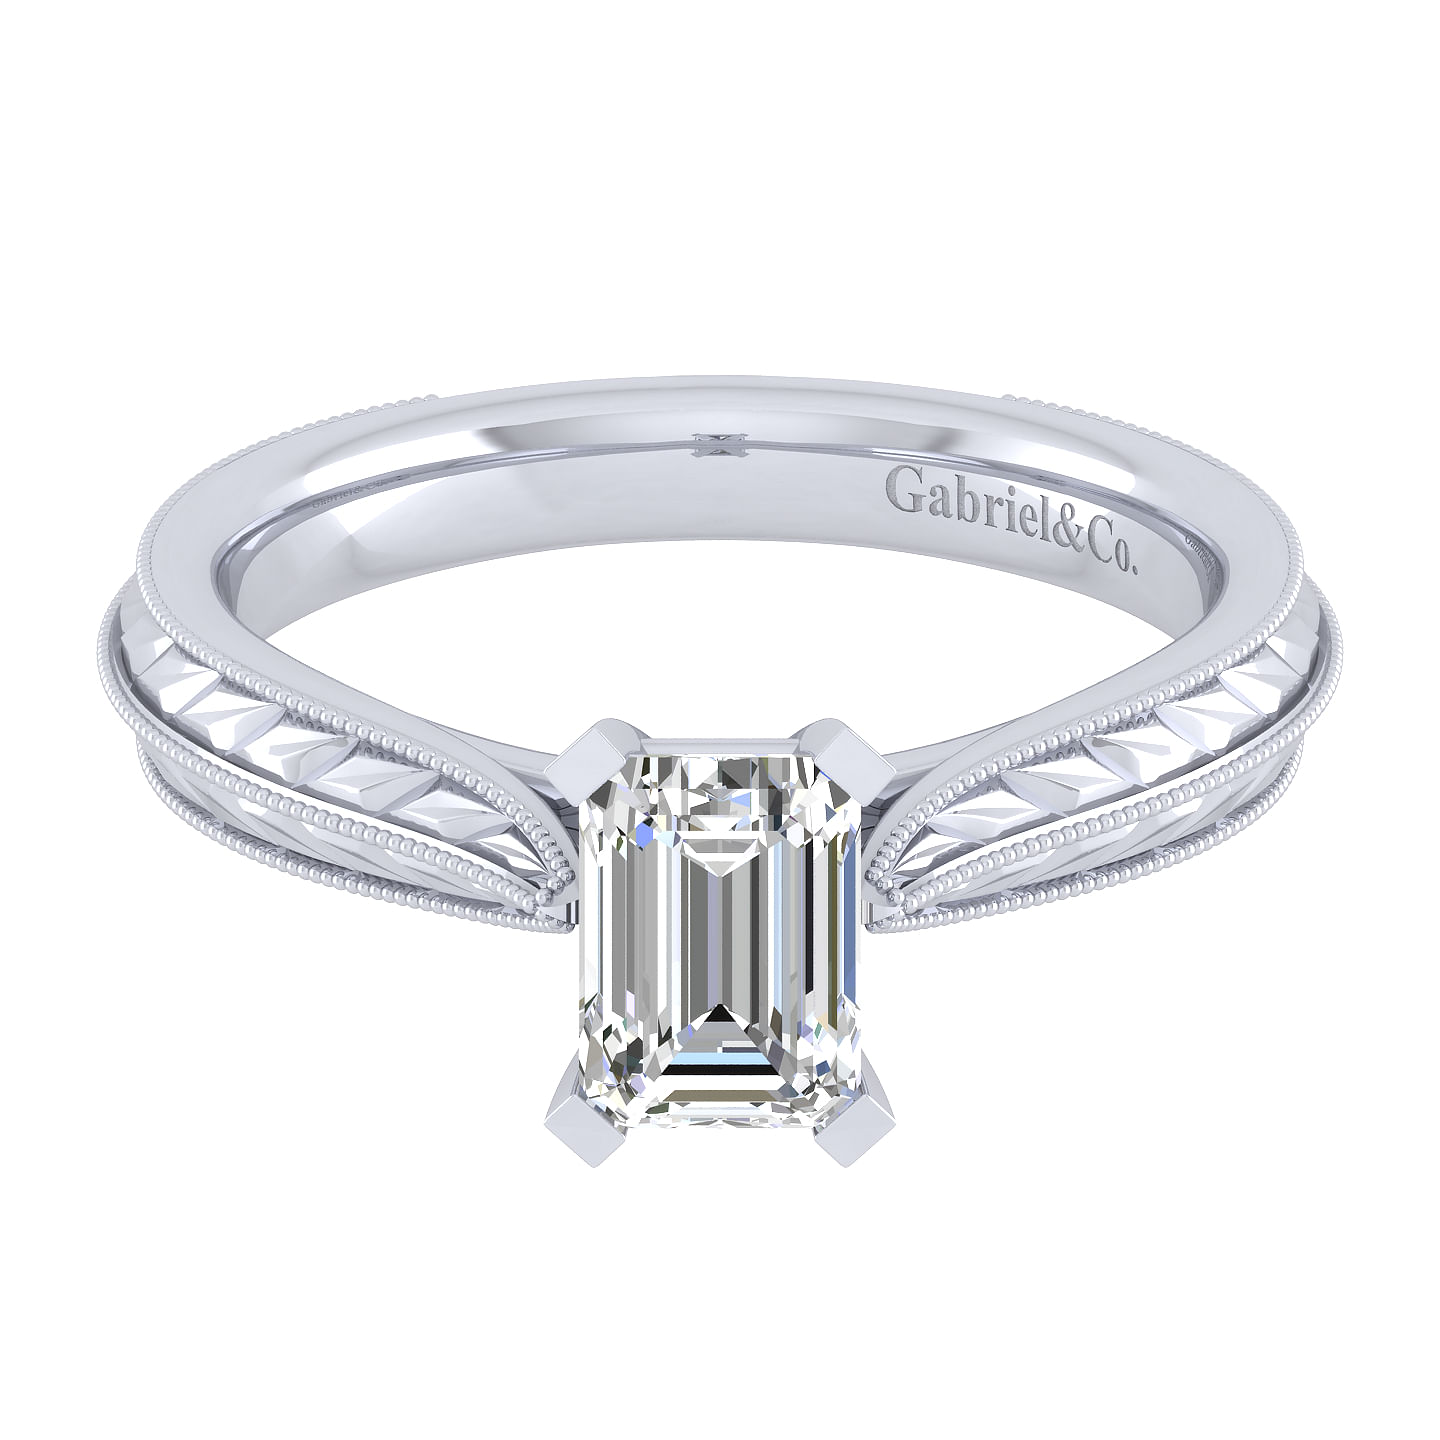 Vintage Inspired 14K White Gold Emerald Cut Solitaire Engagement Ring